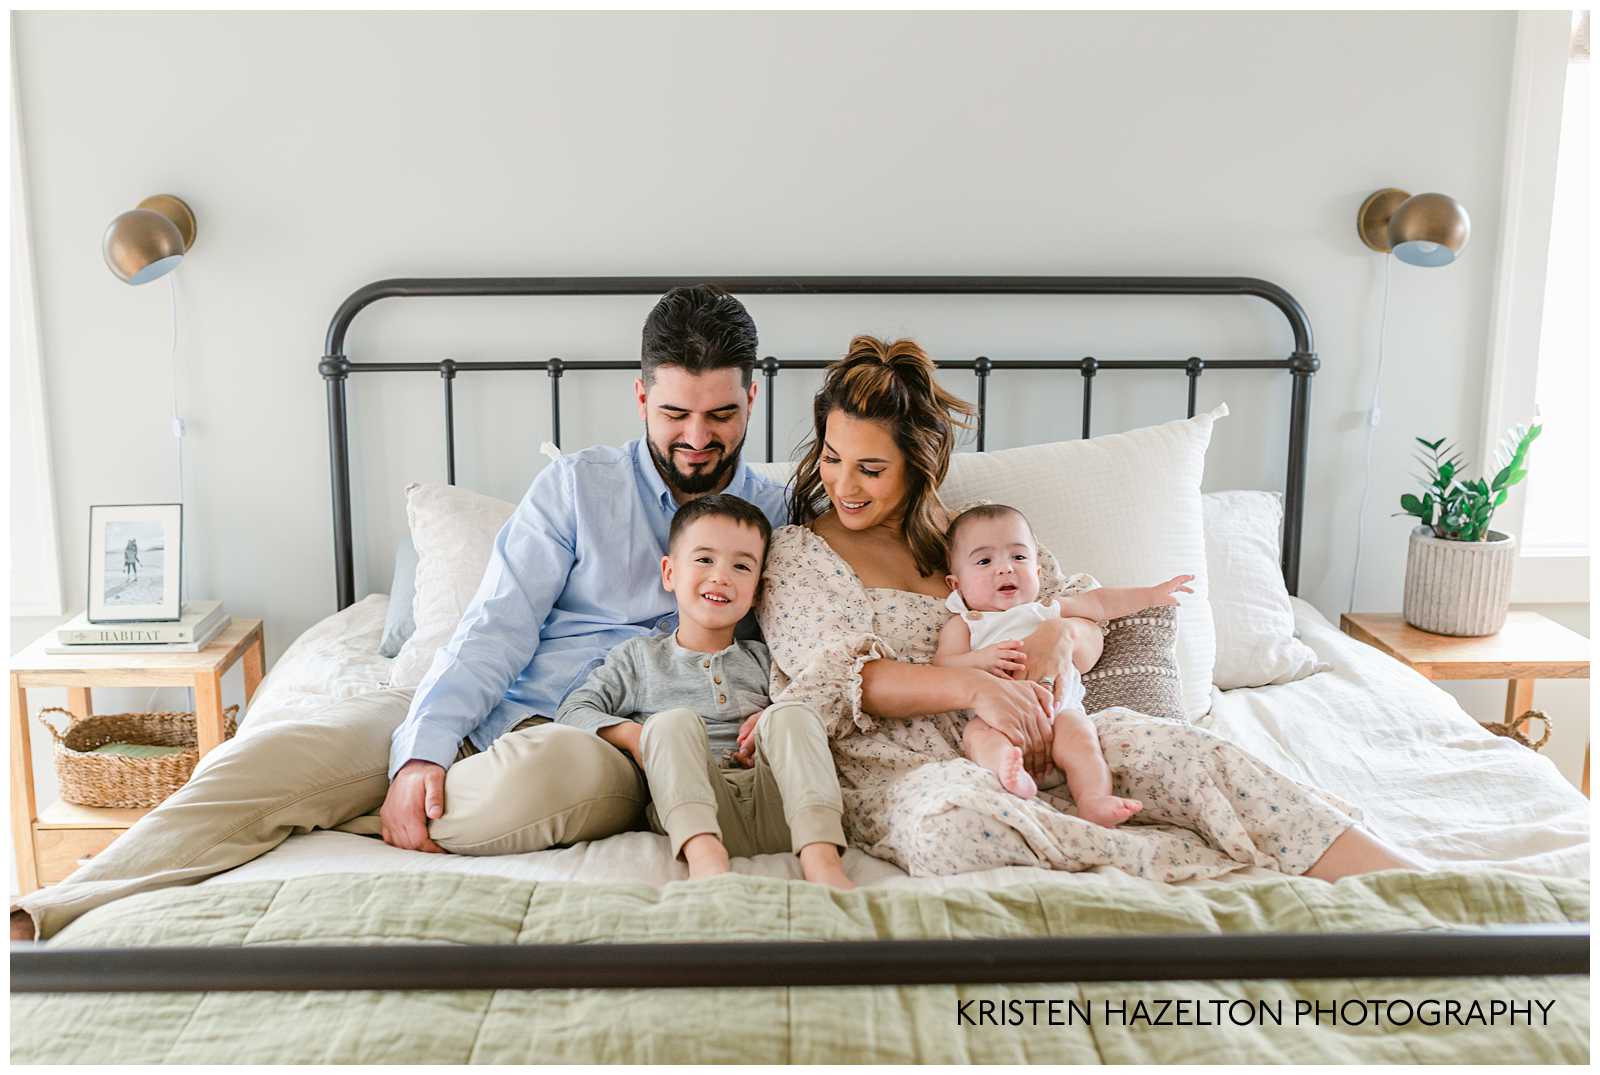 Family of four on a bed for an indoor winter photoshoot. Winter photoshoot ideas by Kristen Hazelton